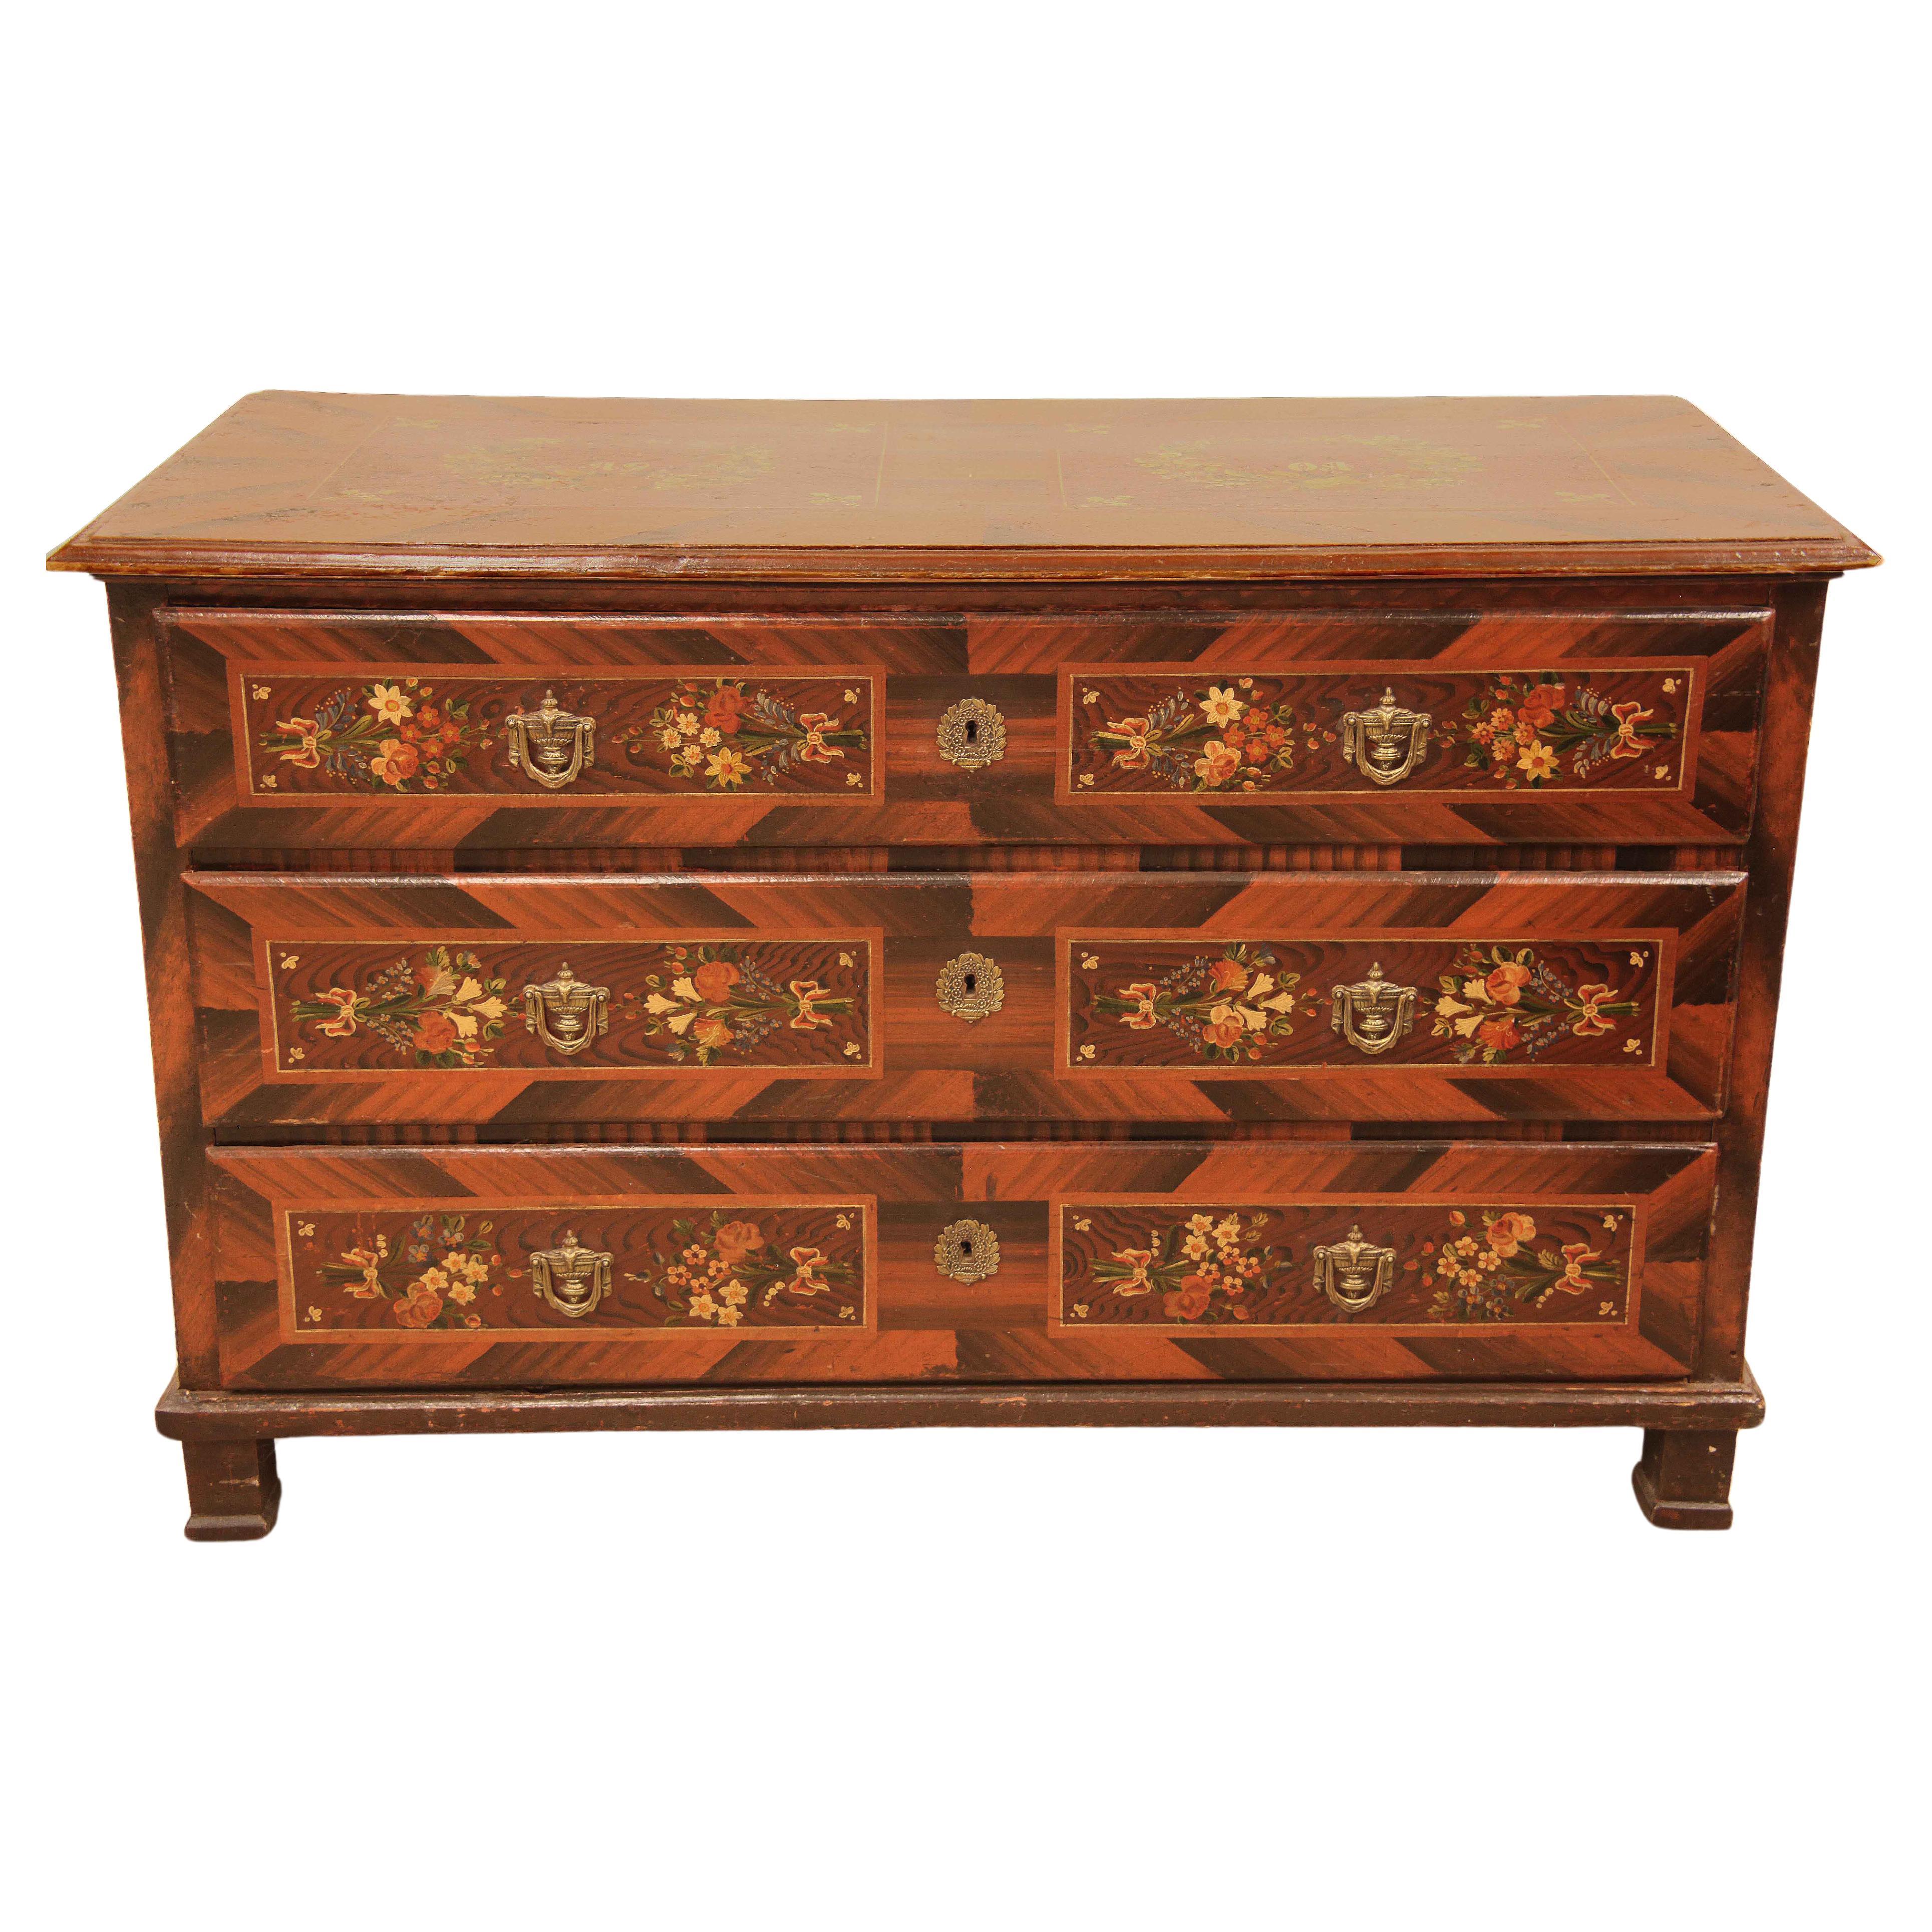 Romanian Commodes and Chests of Drawers